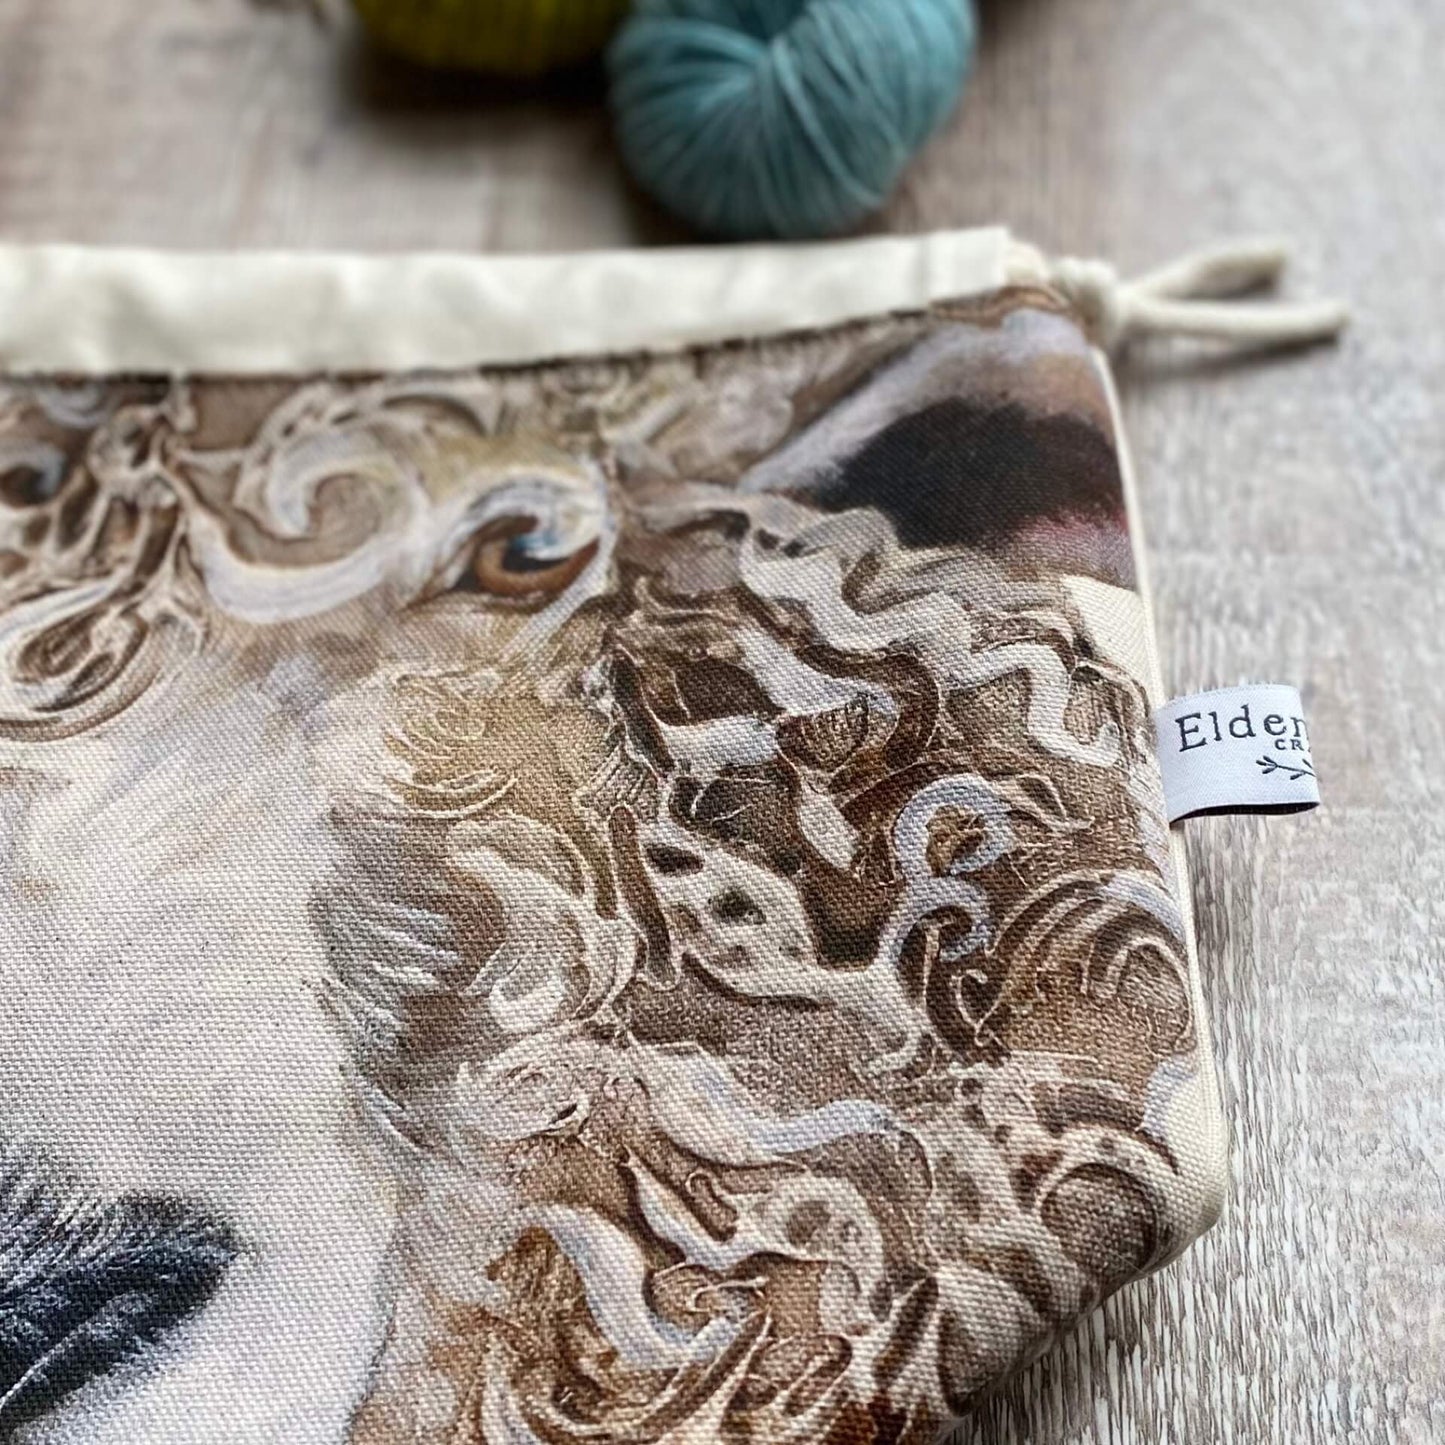 A close up of a large sheep face which is on the front of a handmade project bag sitting on a wooden table. 